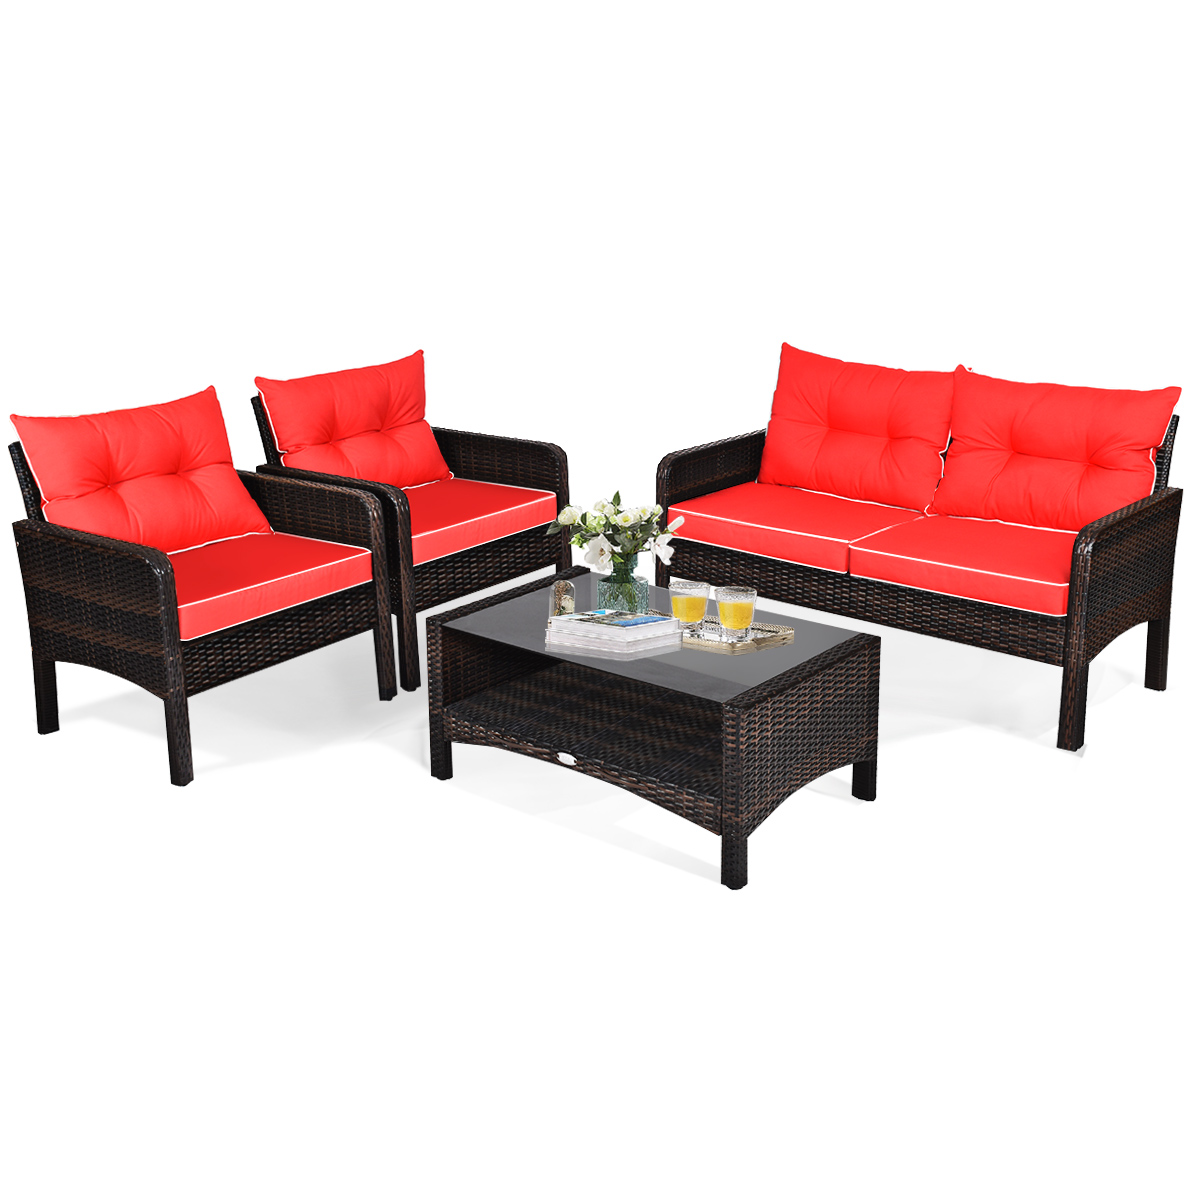 Gymax 4PCS Rattan Patio Conversation Set Red Cushioned Outdoor Furniture Set - image 2 of 9